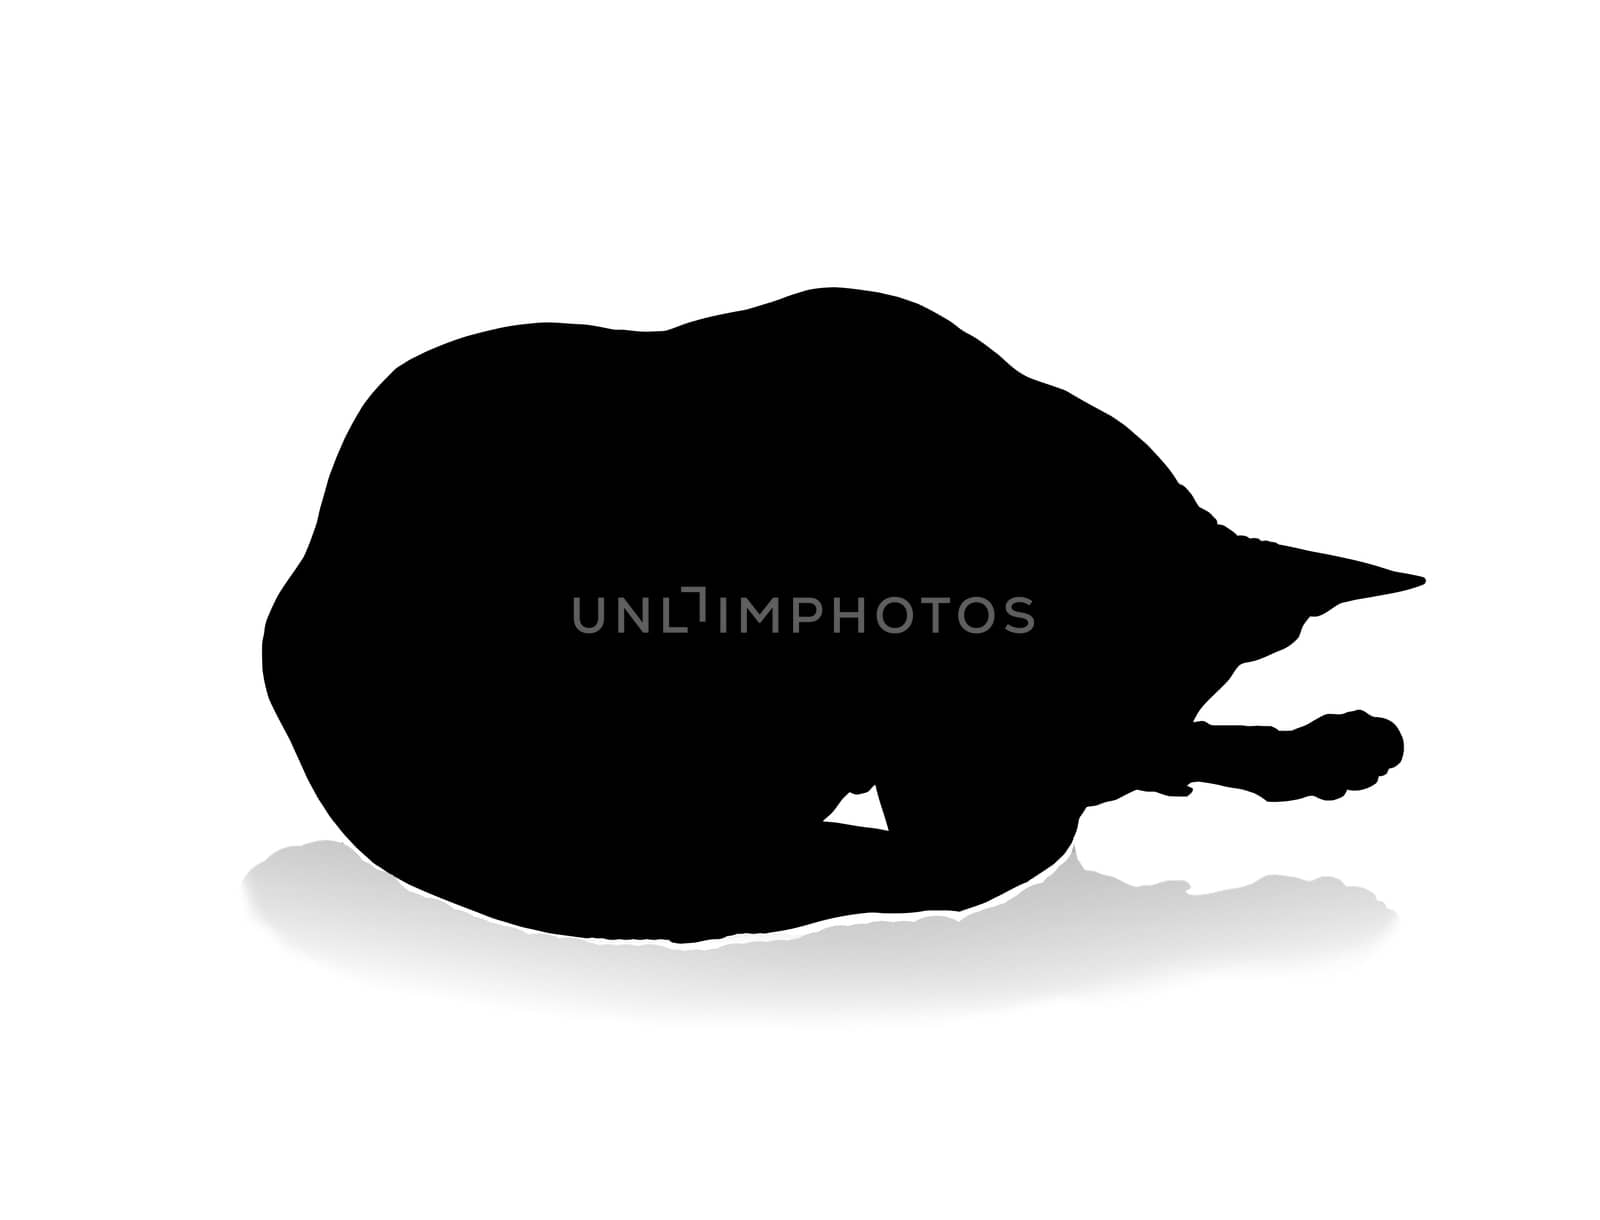 Cat silhouette with shadow, isolated on white background.